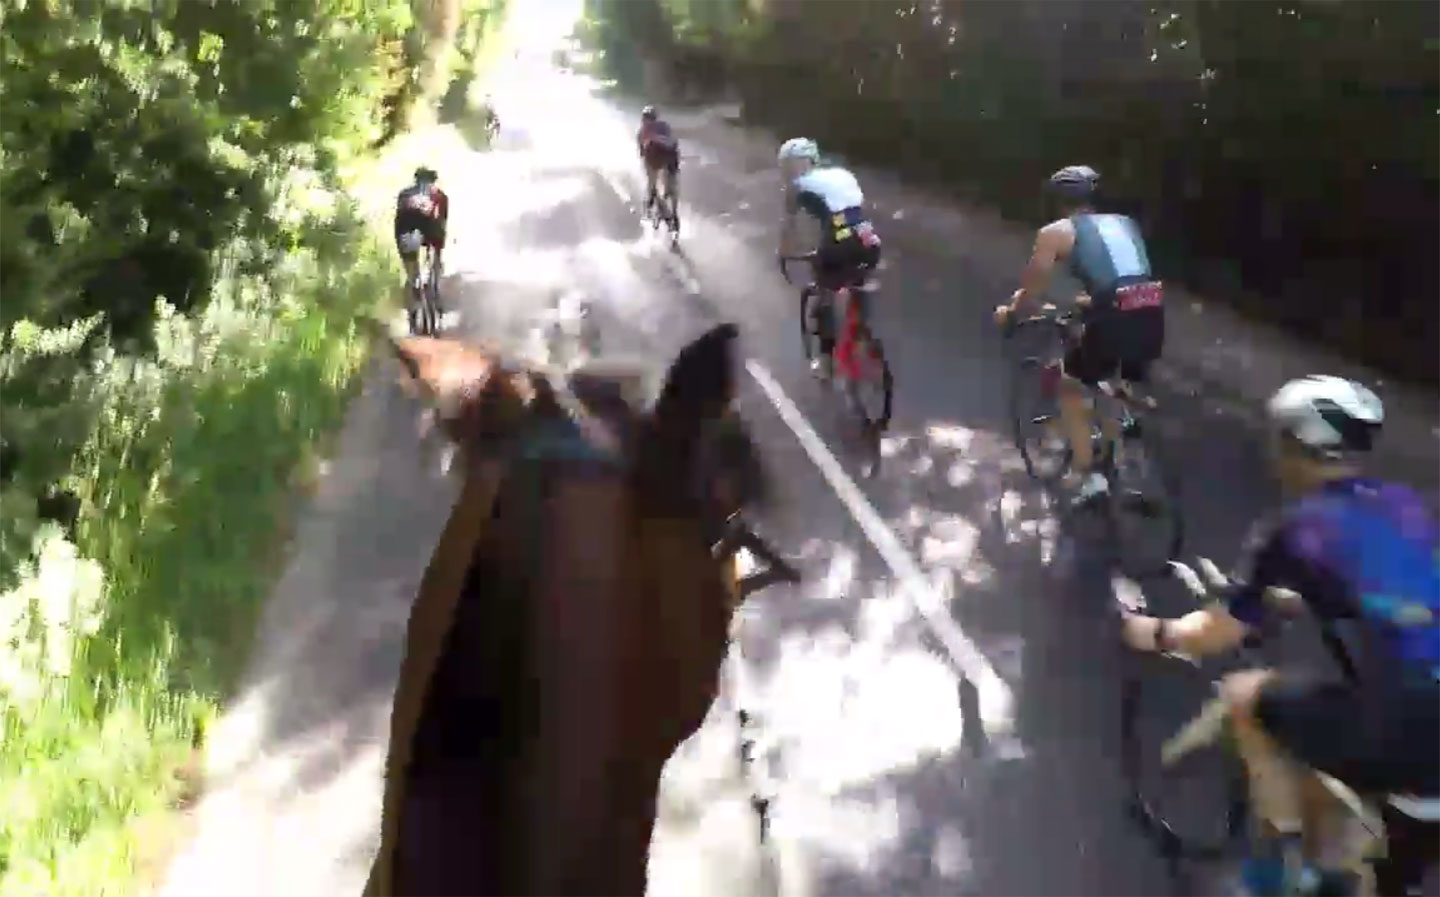 "Absolutely shocking" triathlon cyclists condemned for colliding with horse